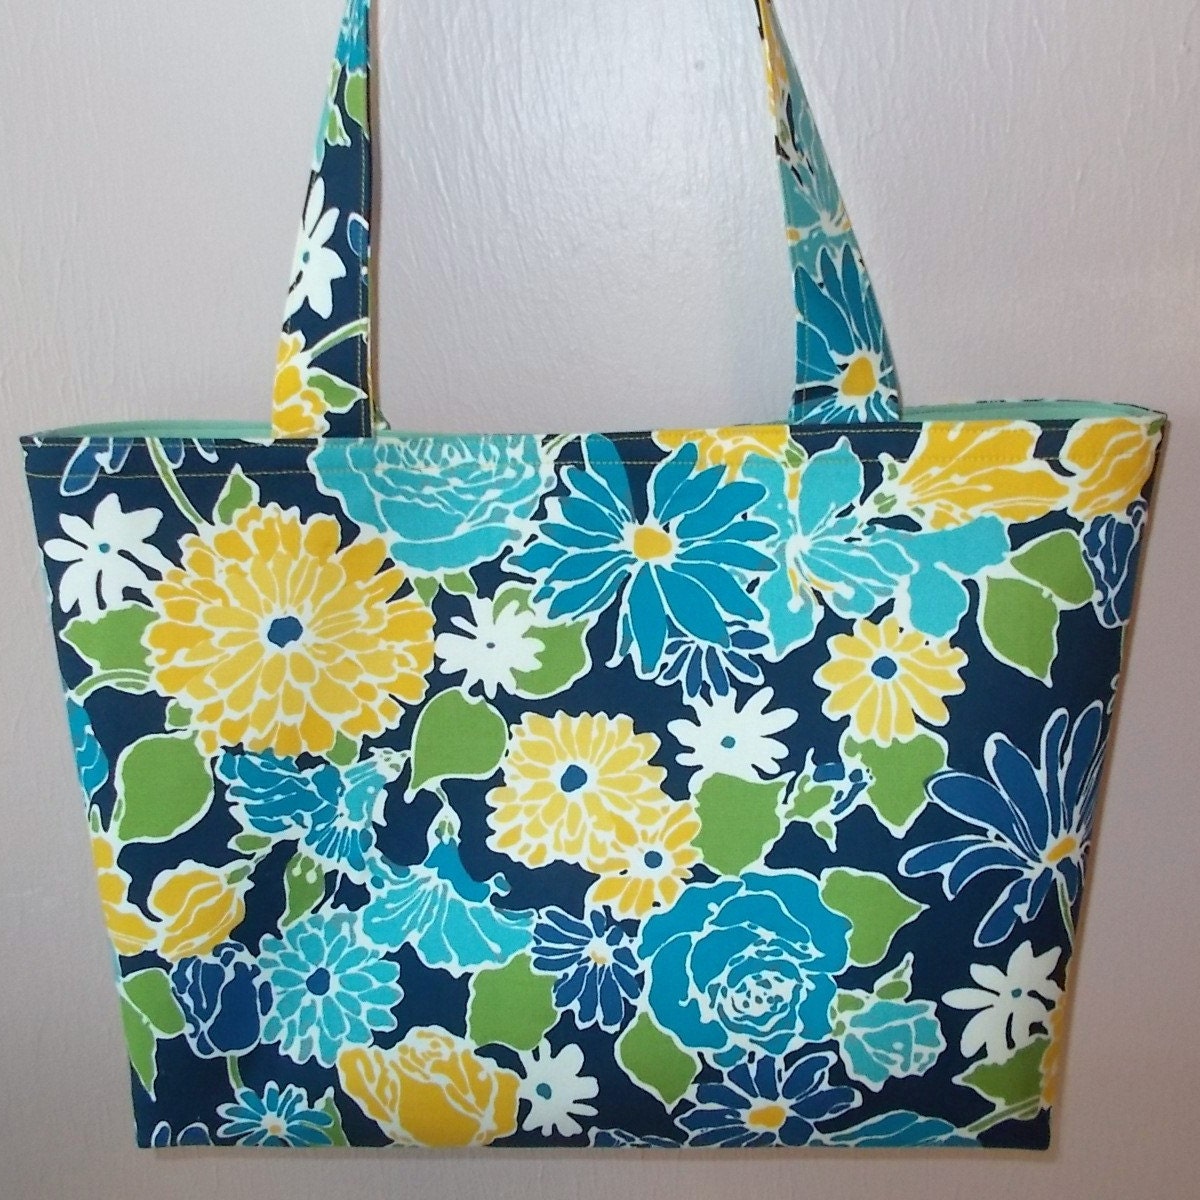 Totes Bags and Purses by 2CinJasDesign on Etsy